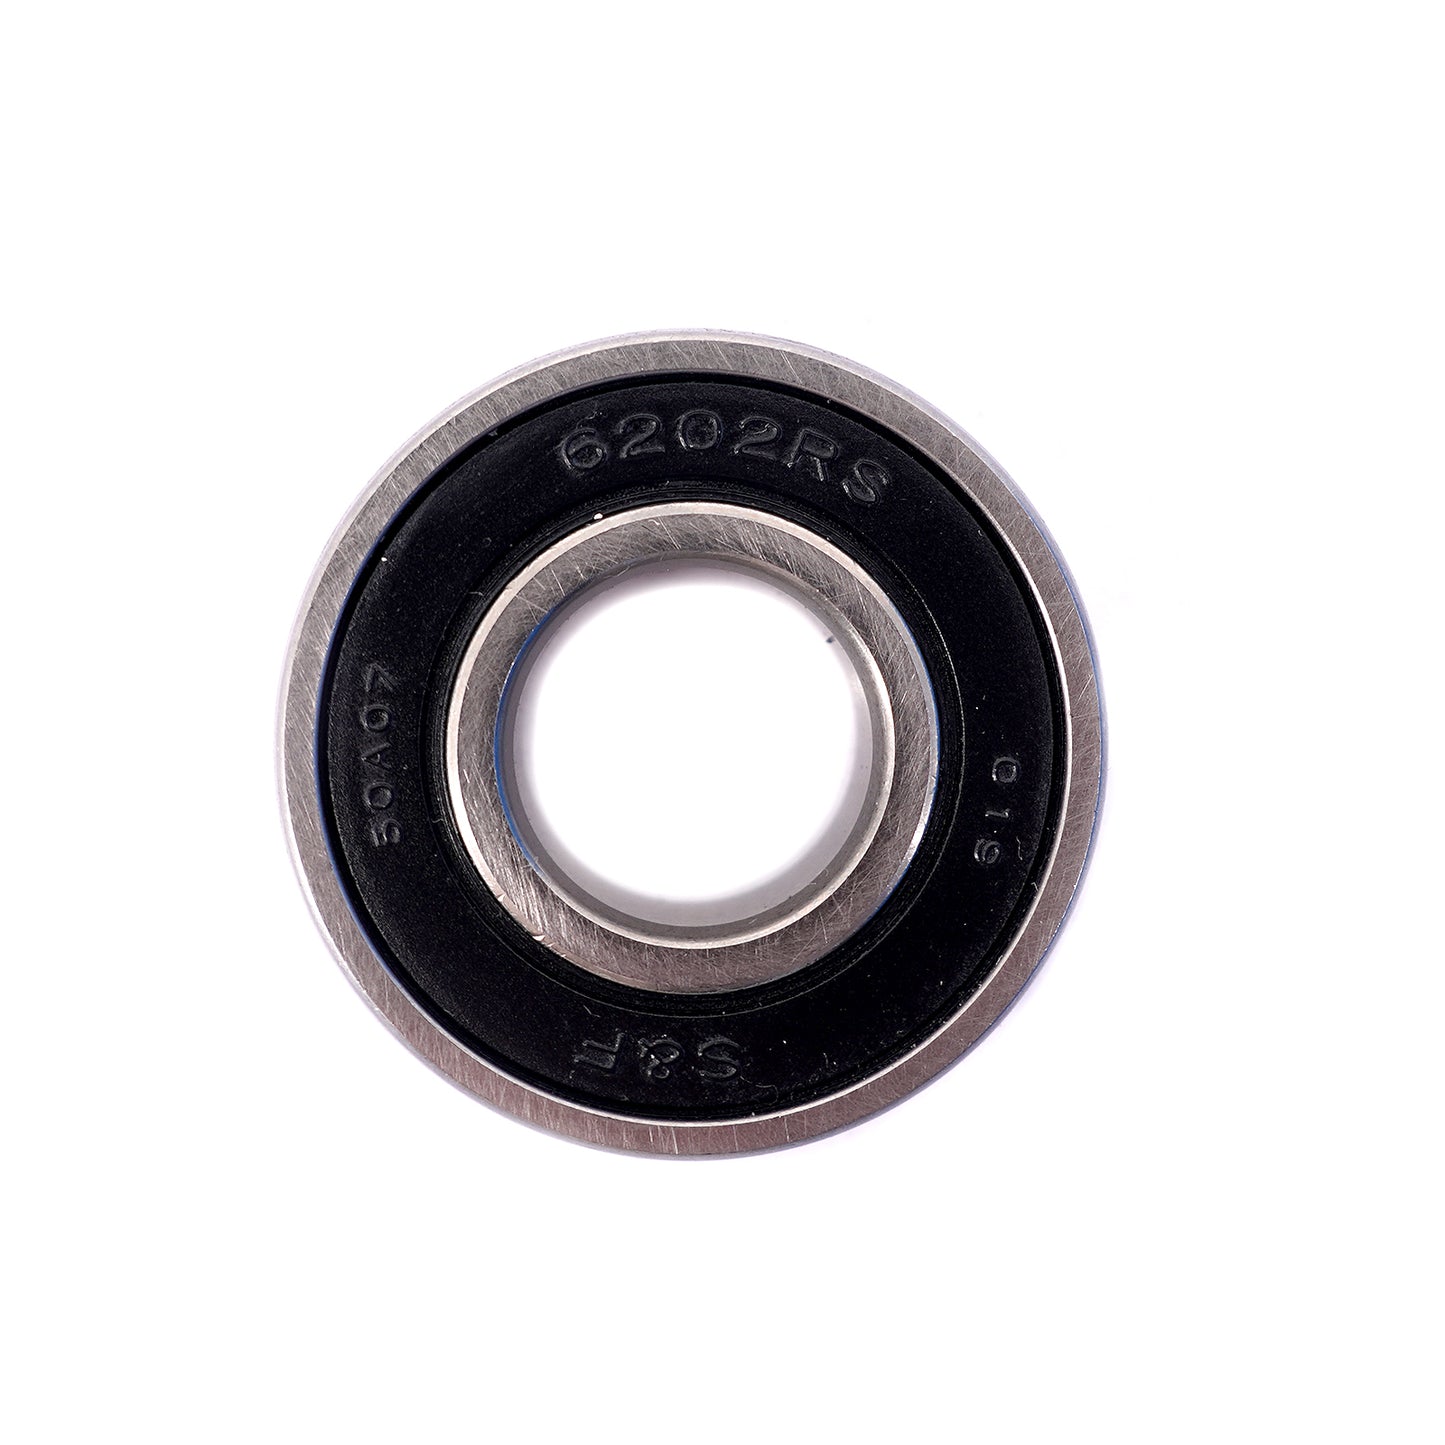 KKE Replacement Standard NSK Bearings For Many Different Motorcycle Dirtbike Wheels Rims